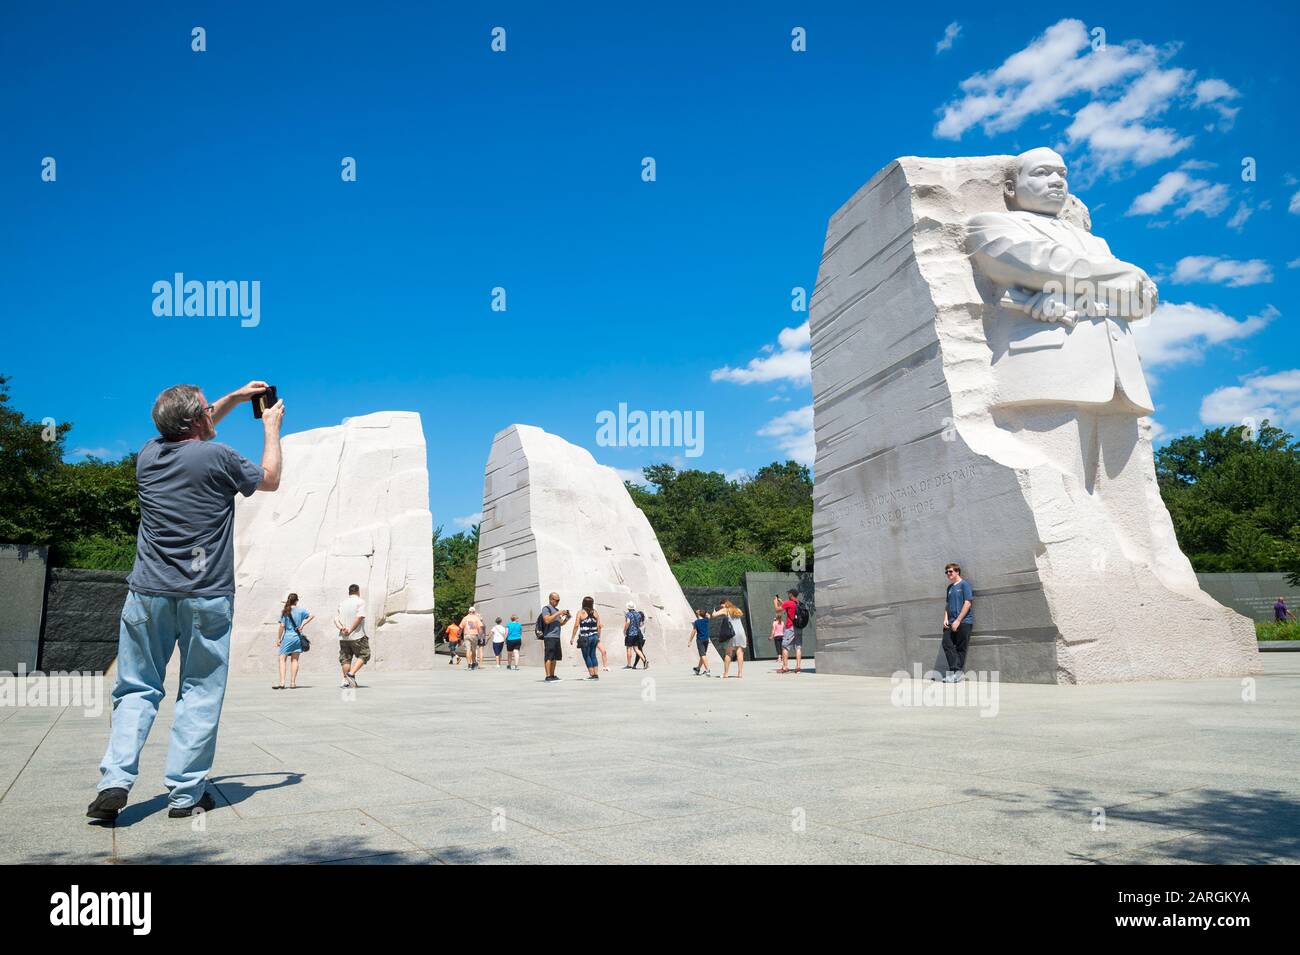 WASHINGTON, DC - AUGUST, 2018: Visitors at the Martin Luther King, Jr Memorial pass through the “Mountain of Despair” to view the statue. Stock Photo